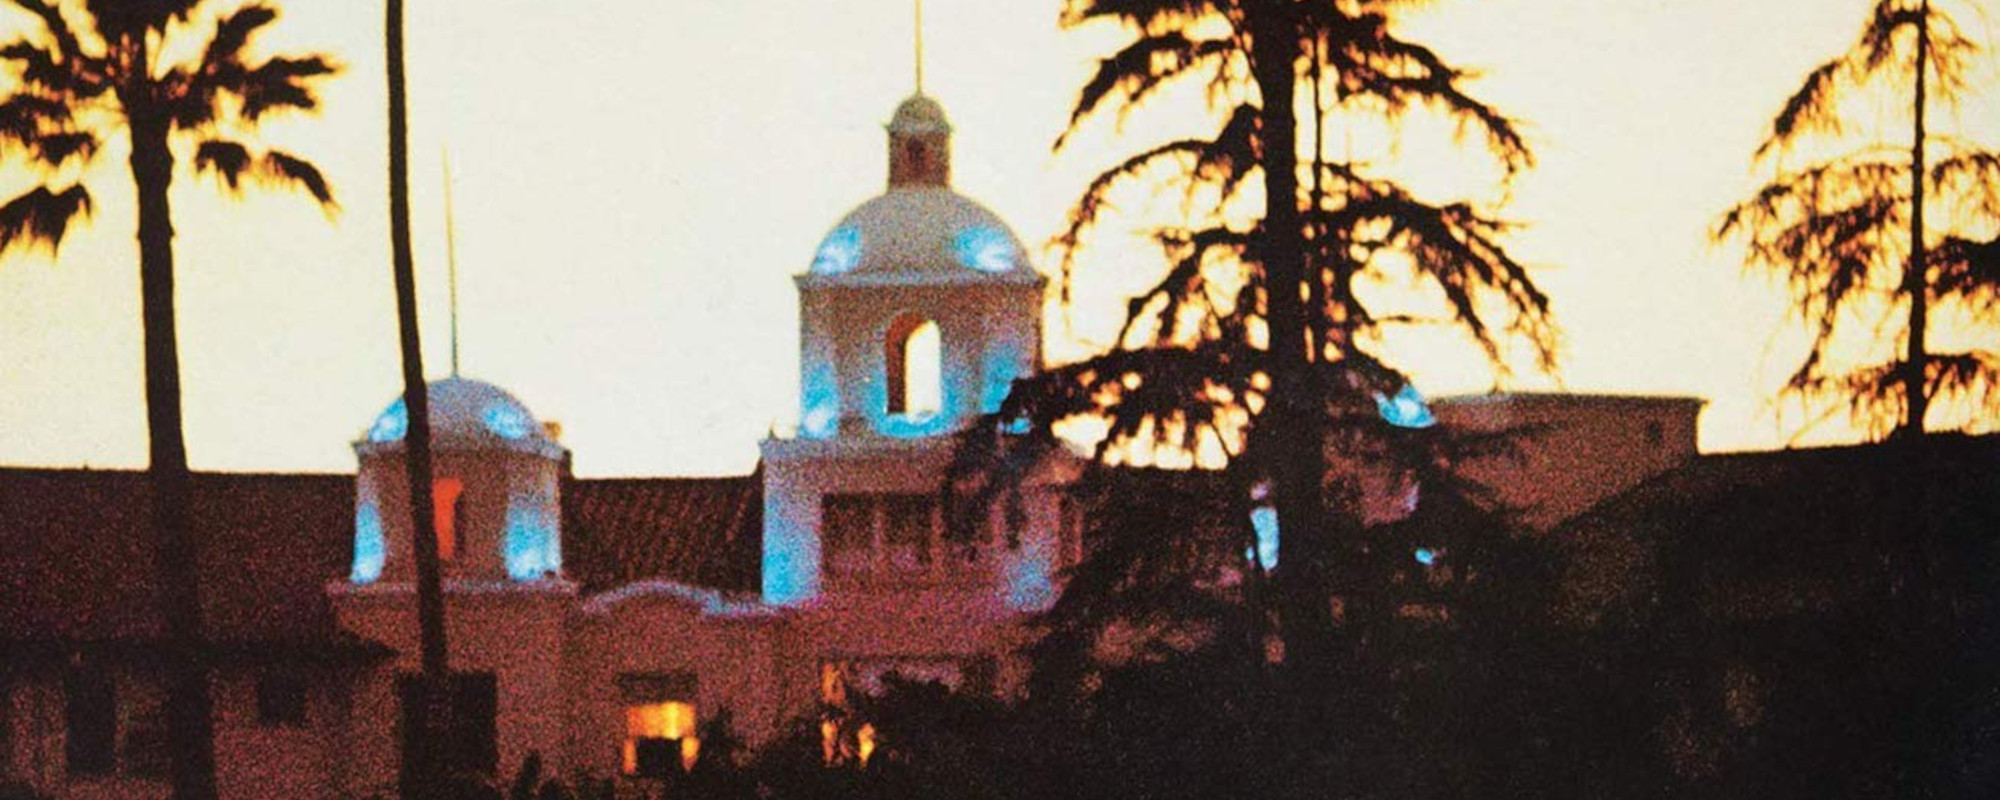 The Story Behind the Eagles’ Famous ‘Hotel California’ Album Cover